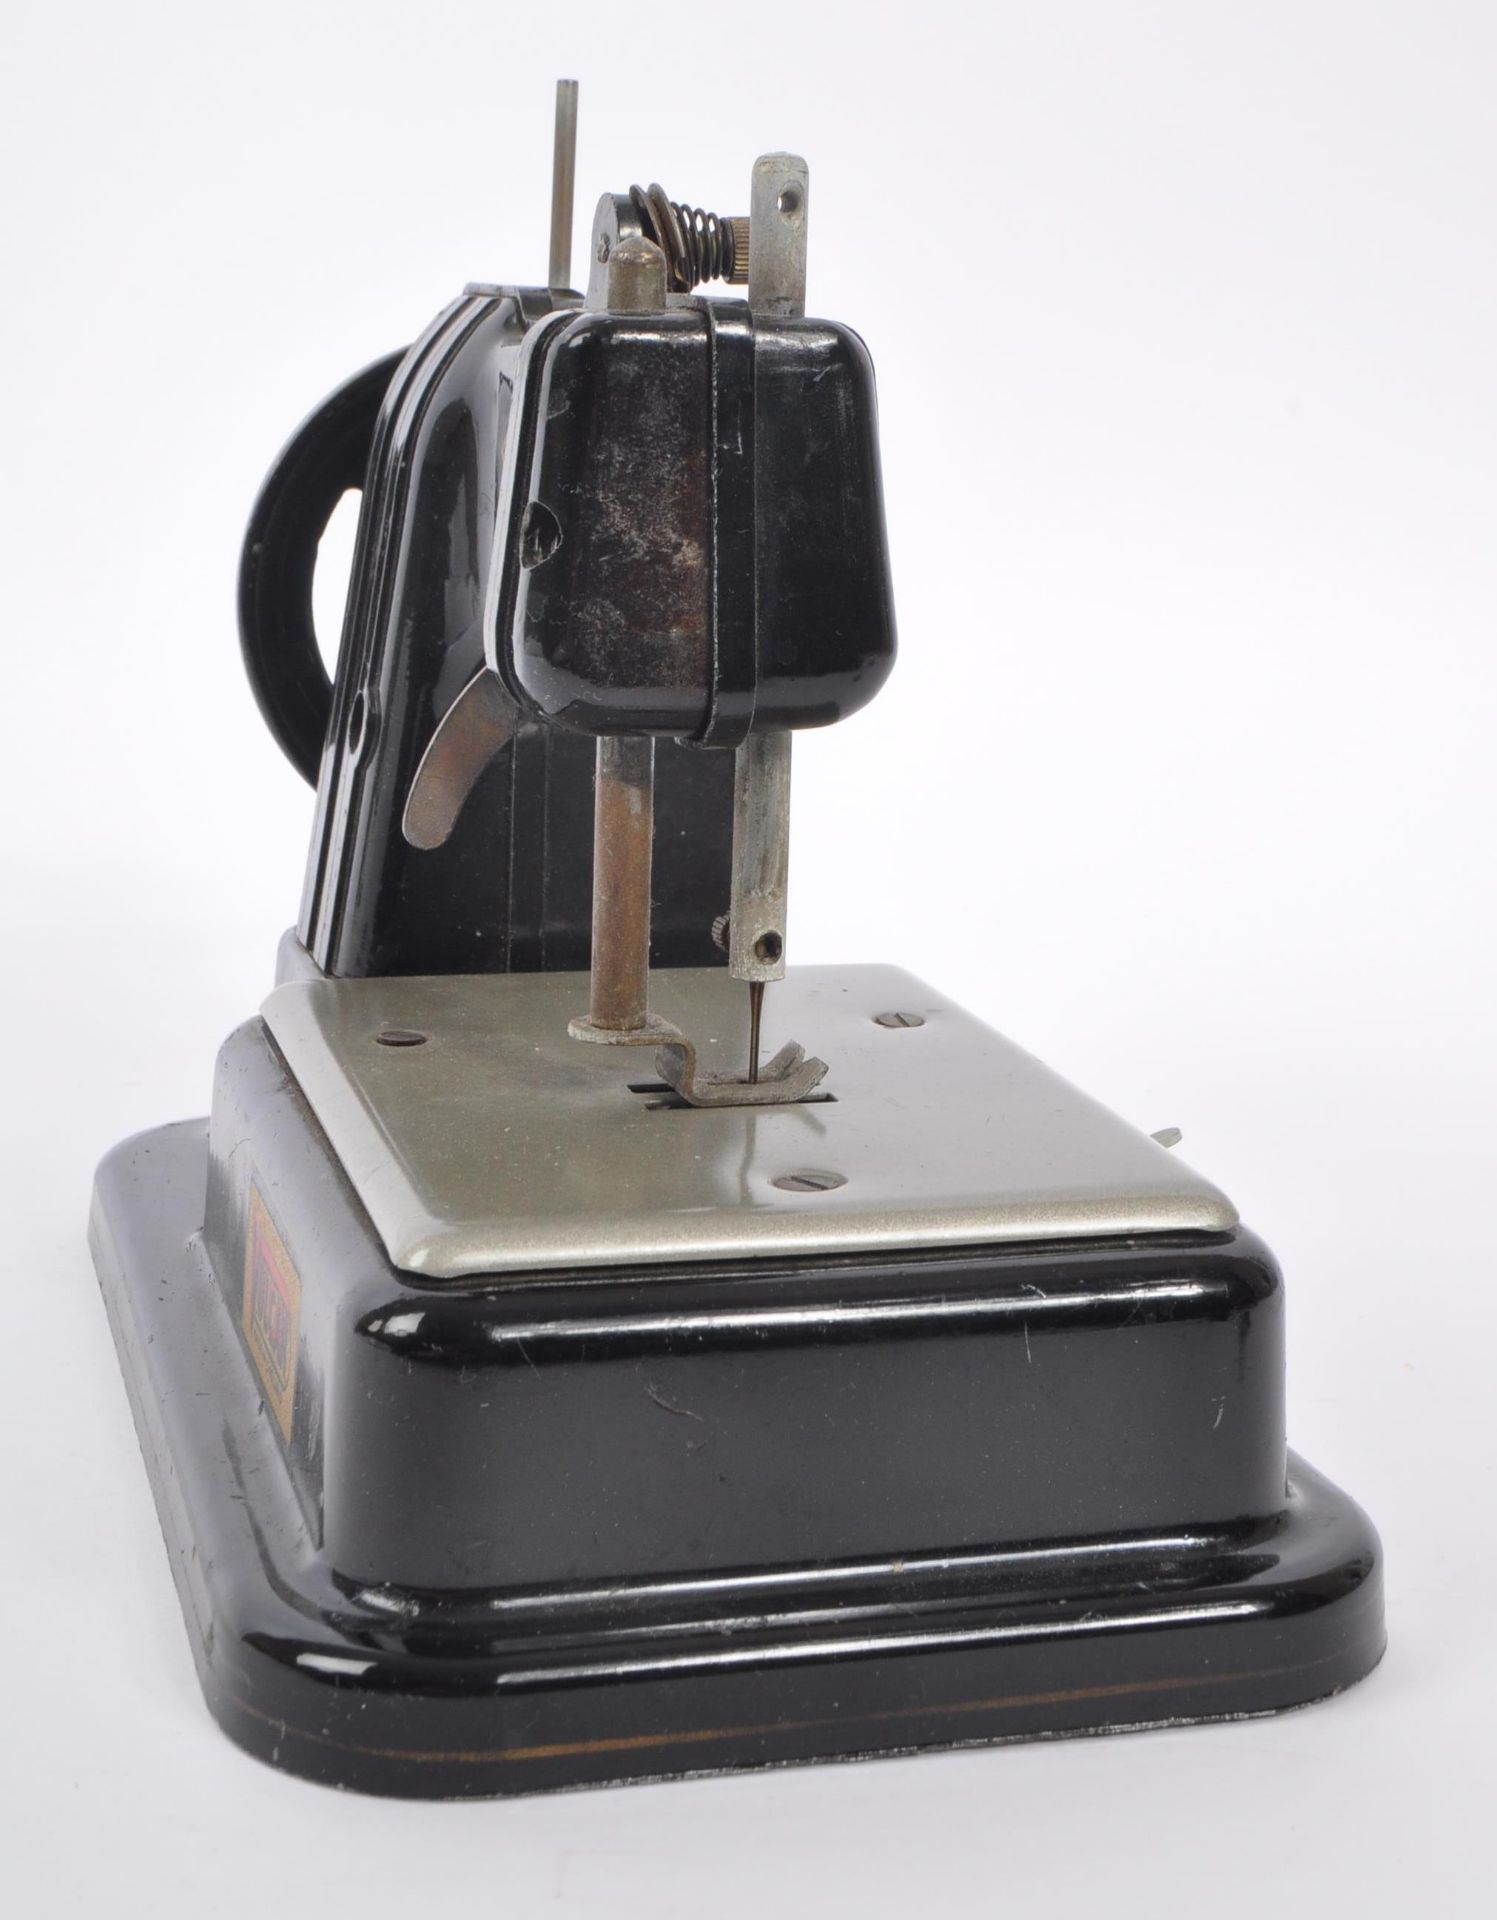 VOLCAN - MID 20TH CENTURY TOY TIN SEWING MACHINE - Image 4 of 5